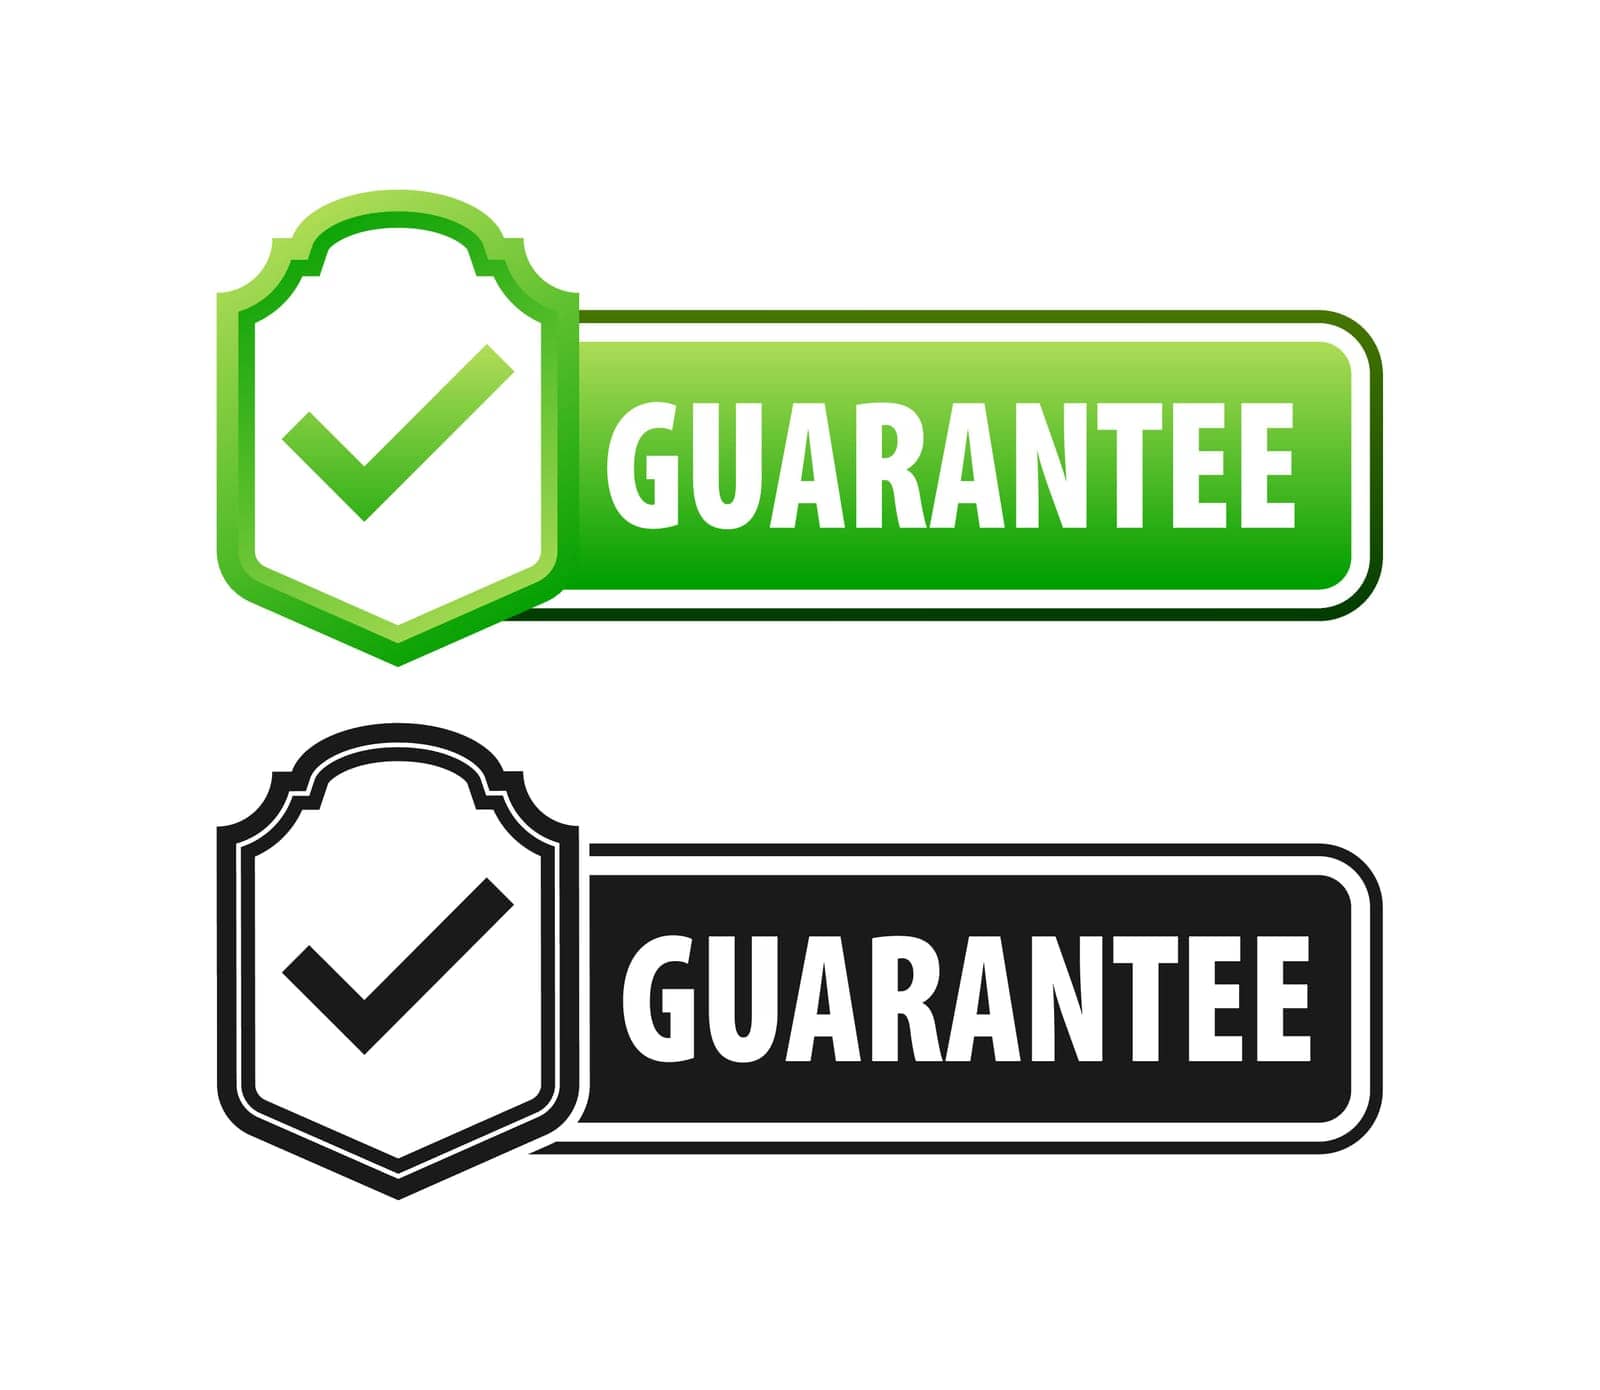 Guarantee sign. Quality assurance, Reliability and confidence in every purchase. Vector illustration